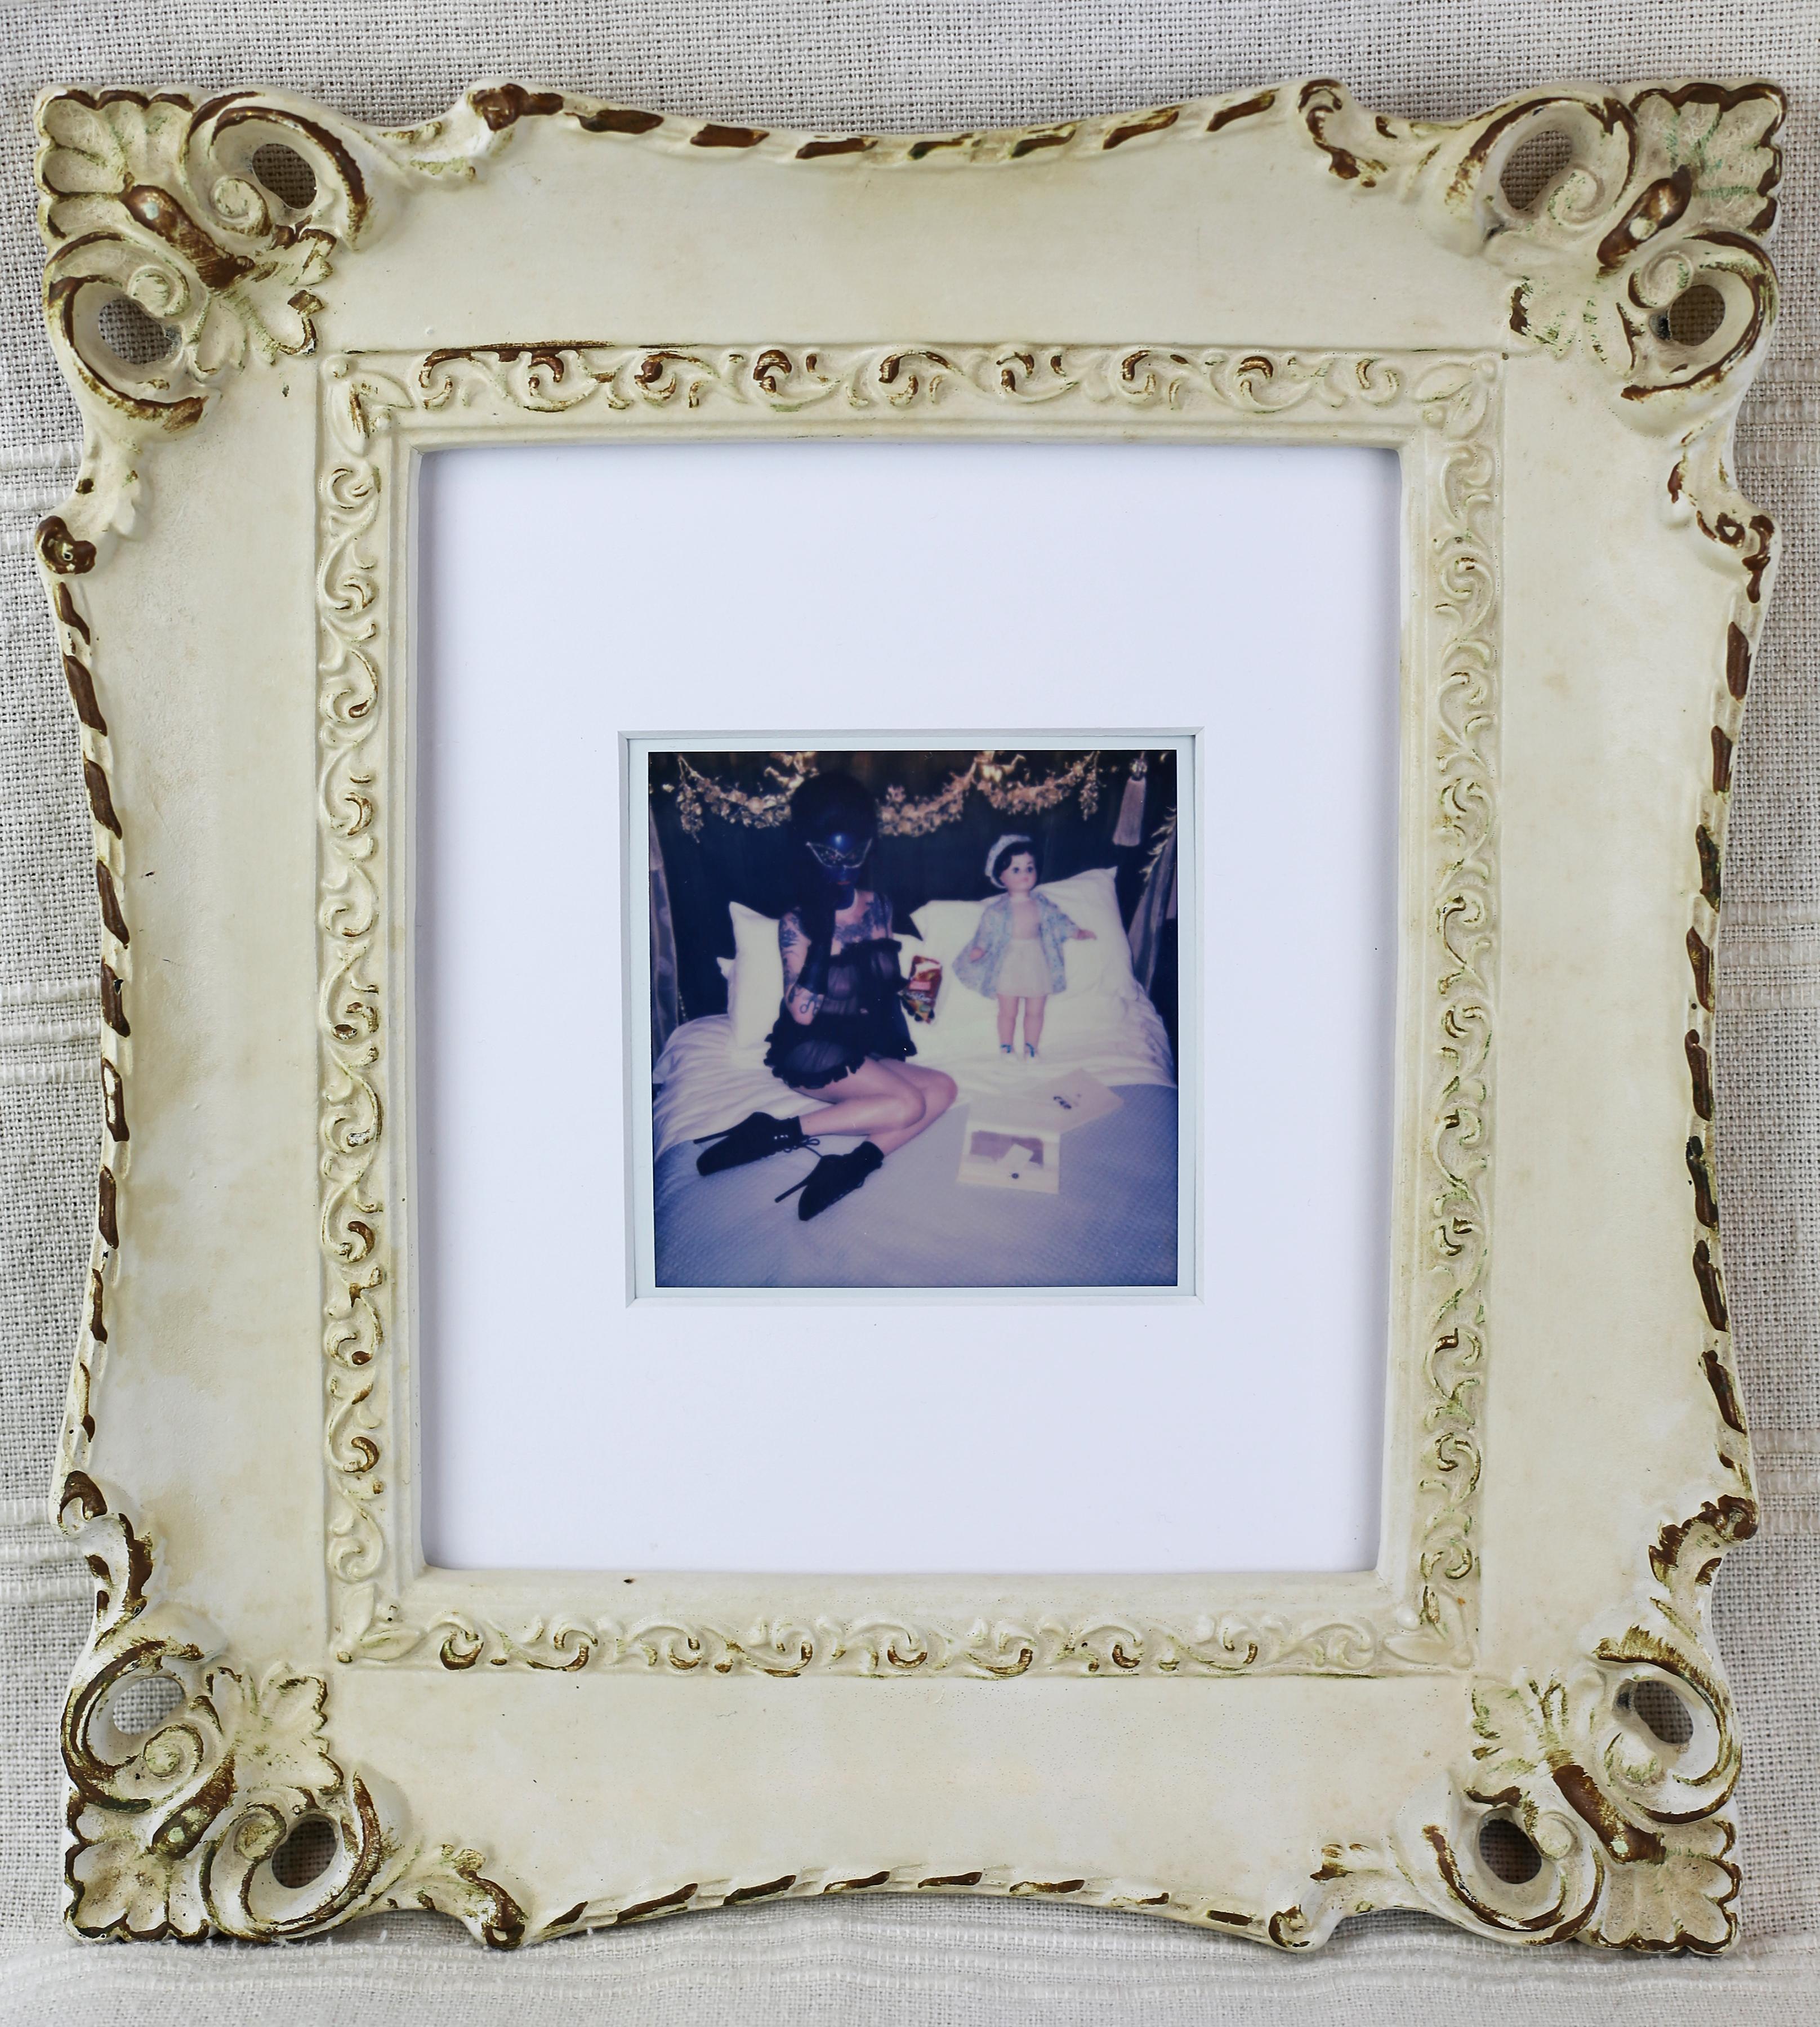 Miss Meatface Color Photograph - Sweets, Photography, Polaroid, Figurative Art, Vintage Frame, Signed